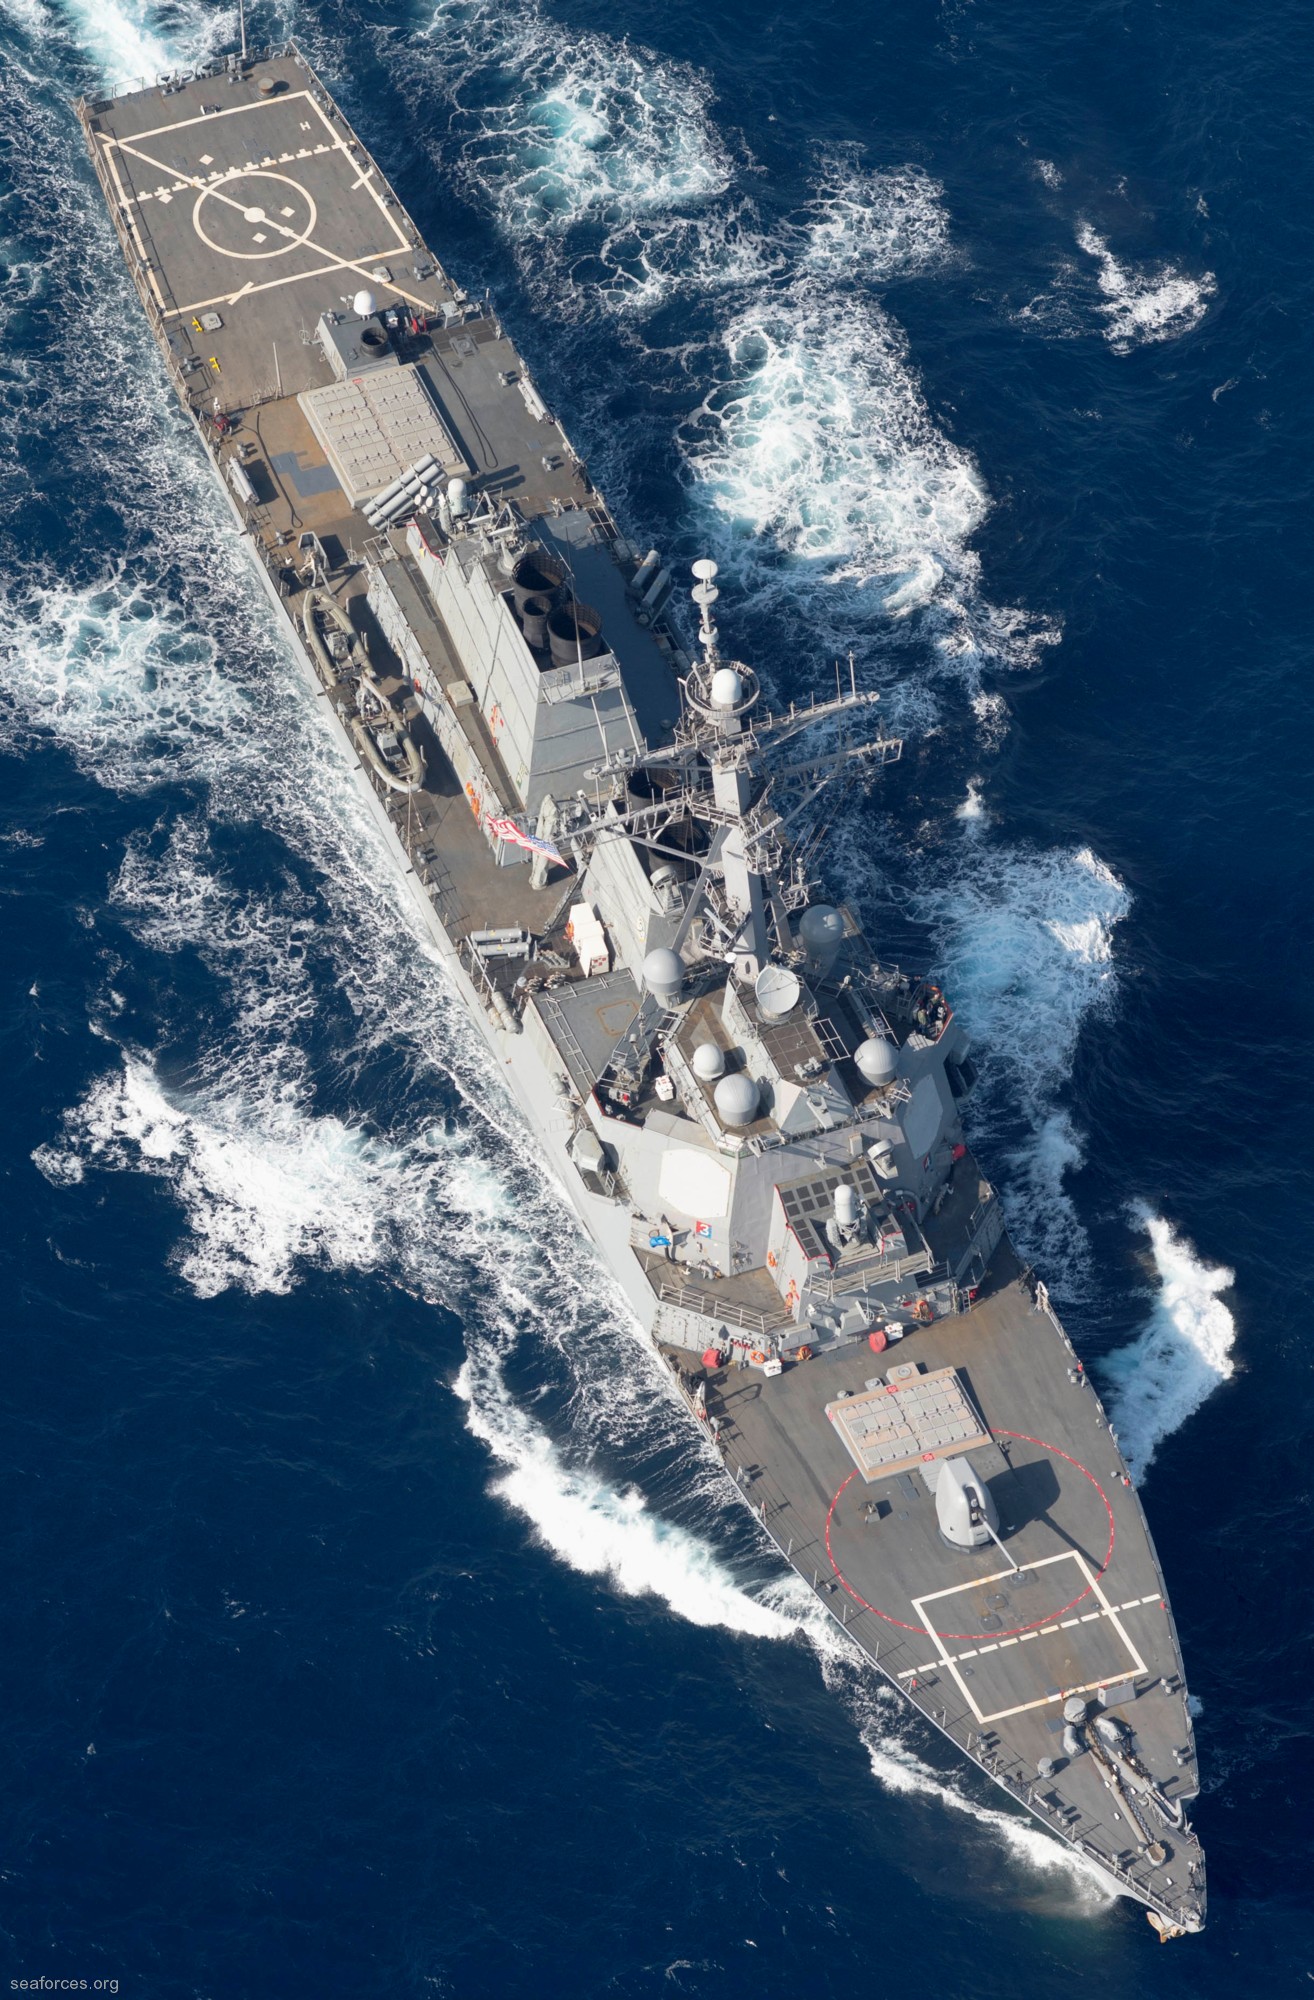 ddg-55 uss stout guided missile destroyer us navy 37 arleigh burke class